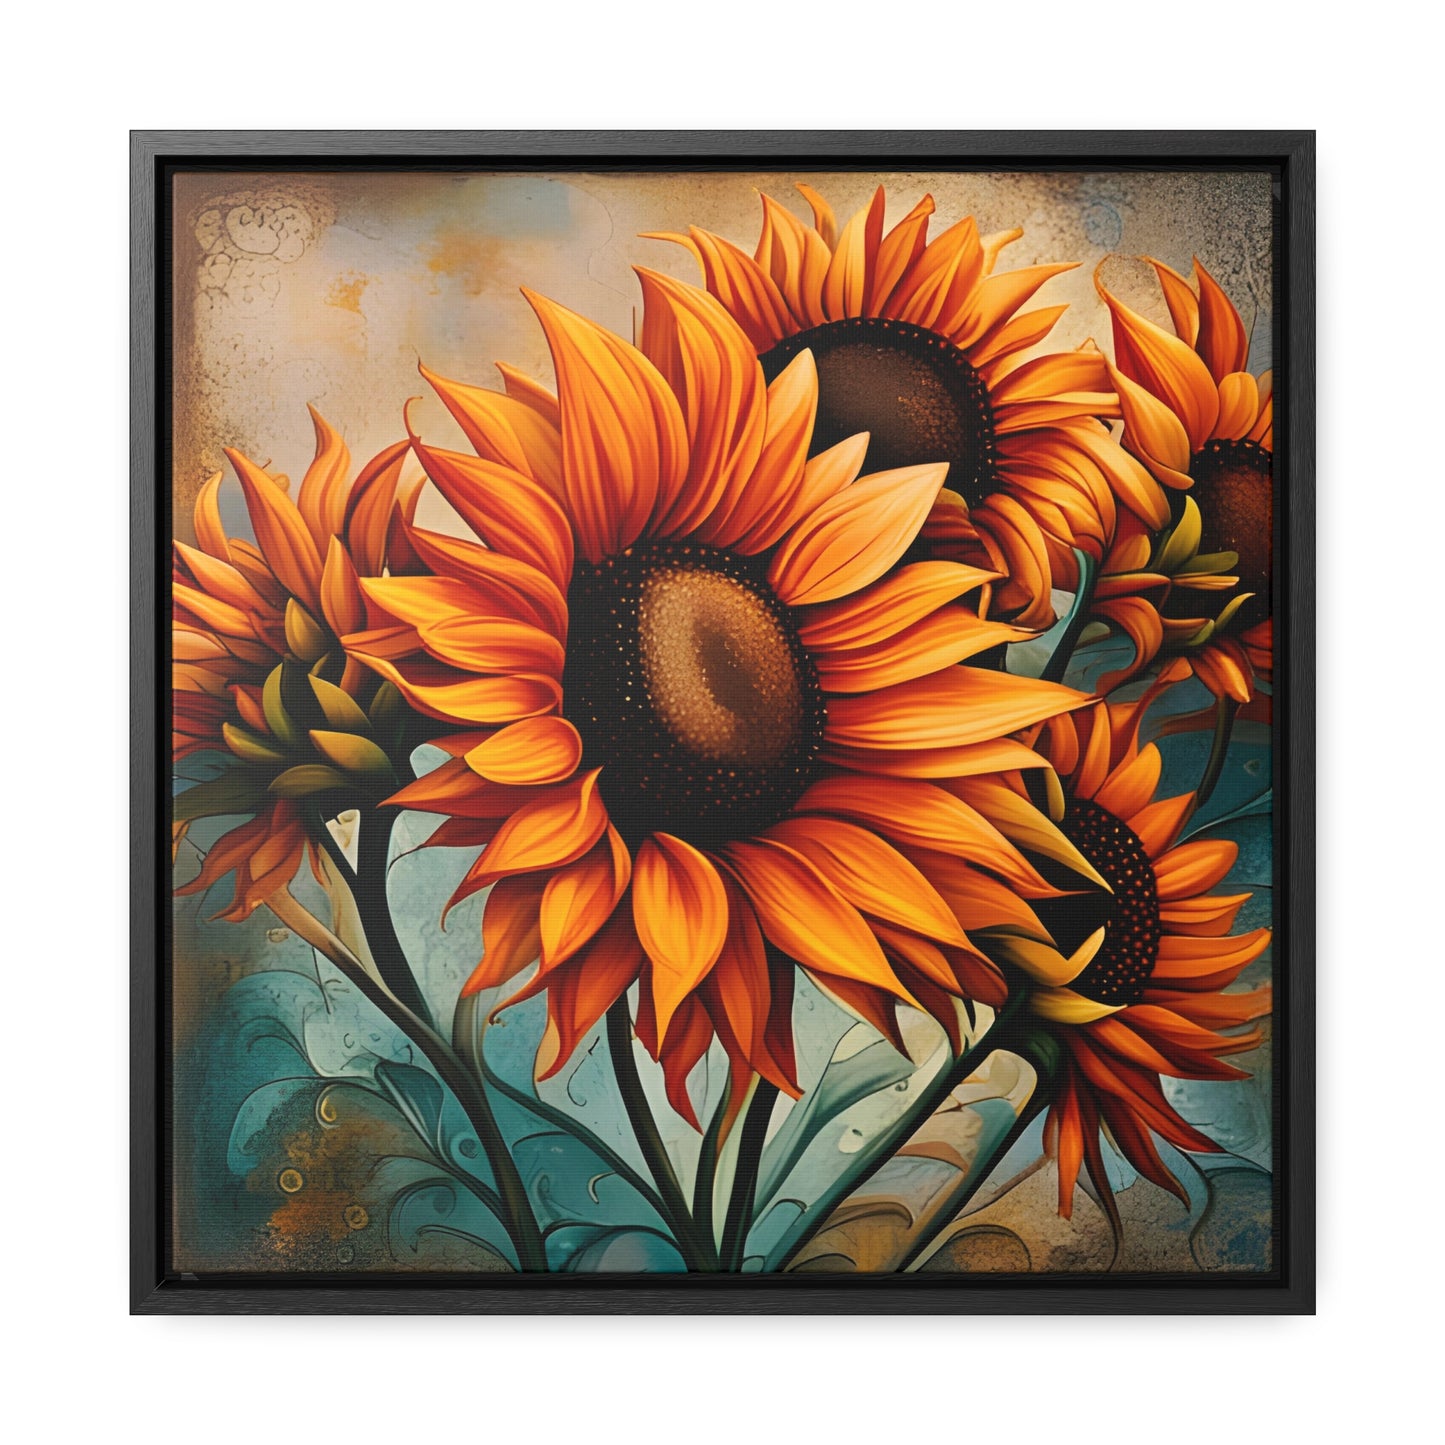 Sunflower Lovers Delight - Sunflower Crop on Distressed Blue and Copper Background Printed on Canvas in a Floating Frame